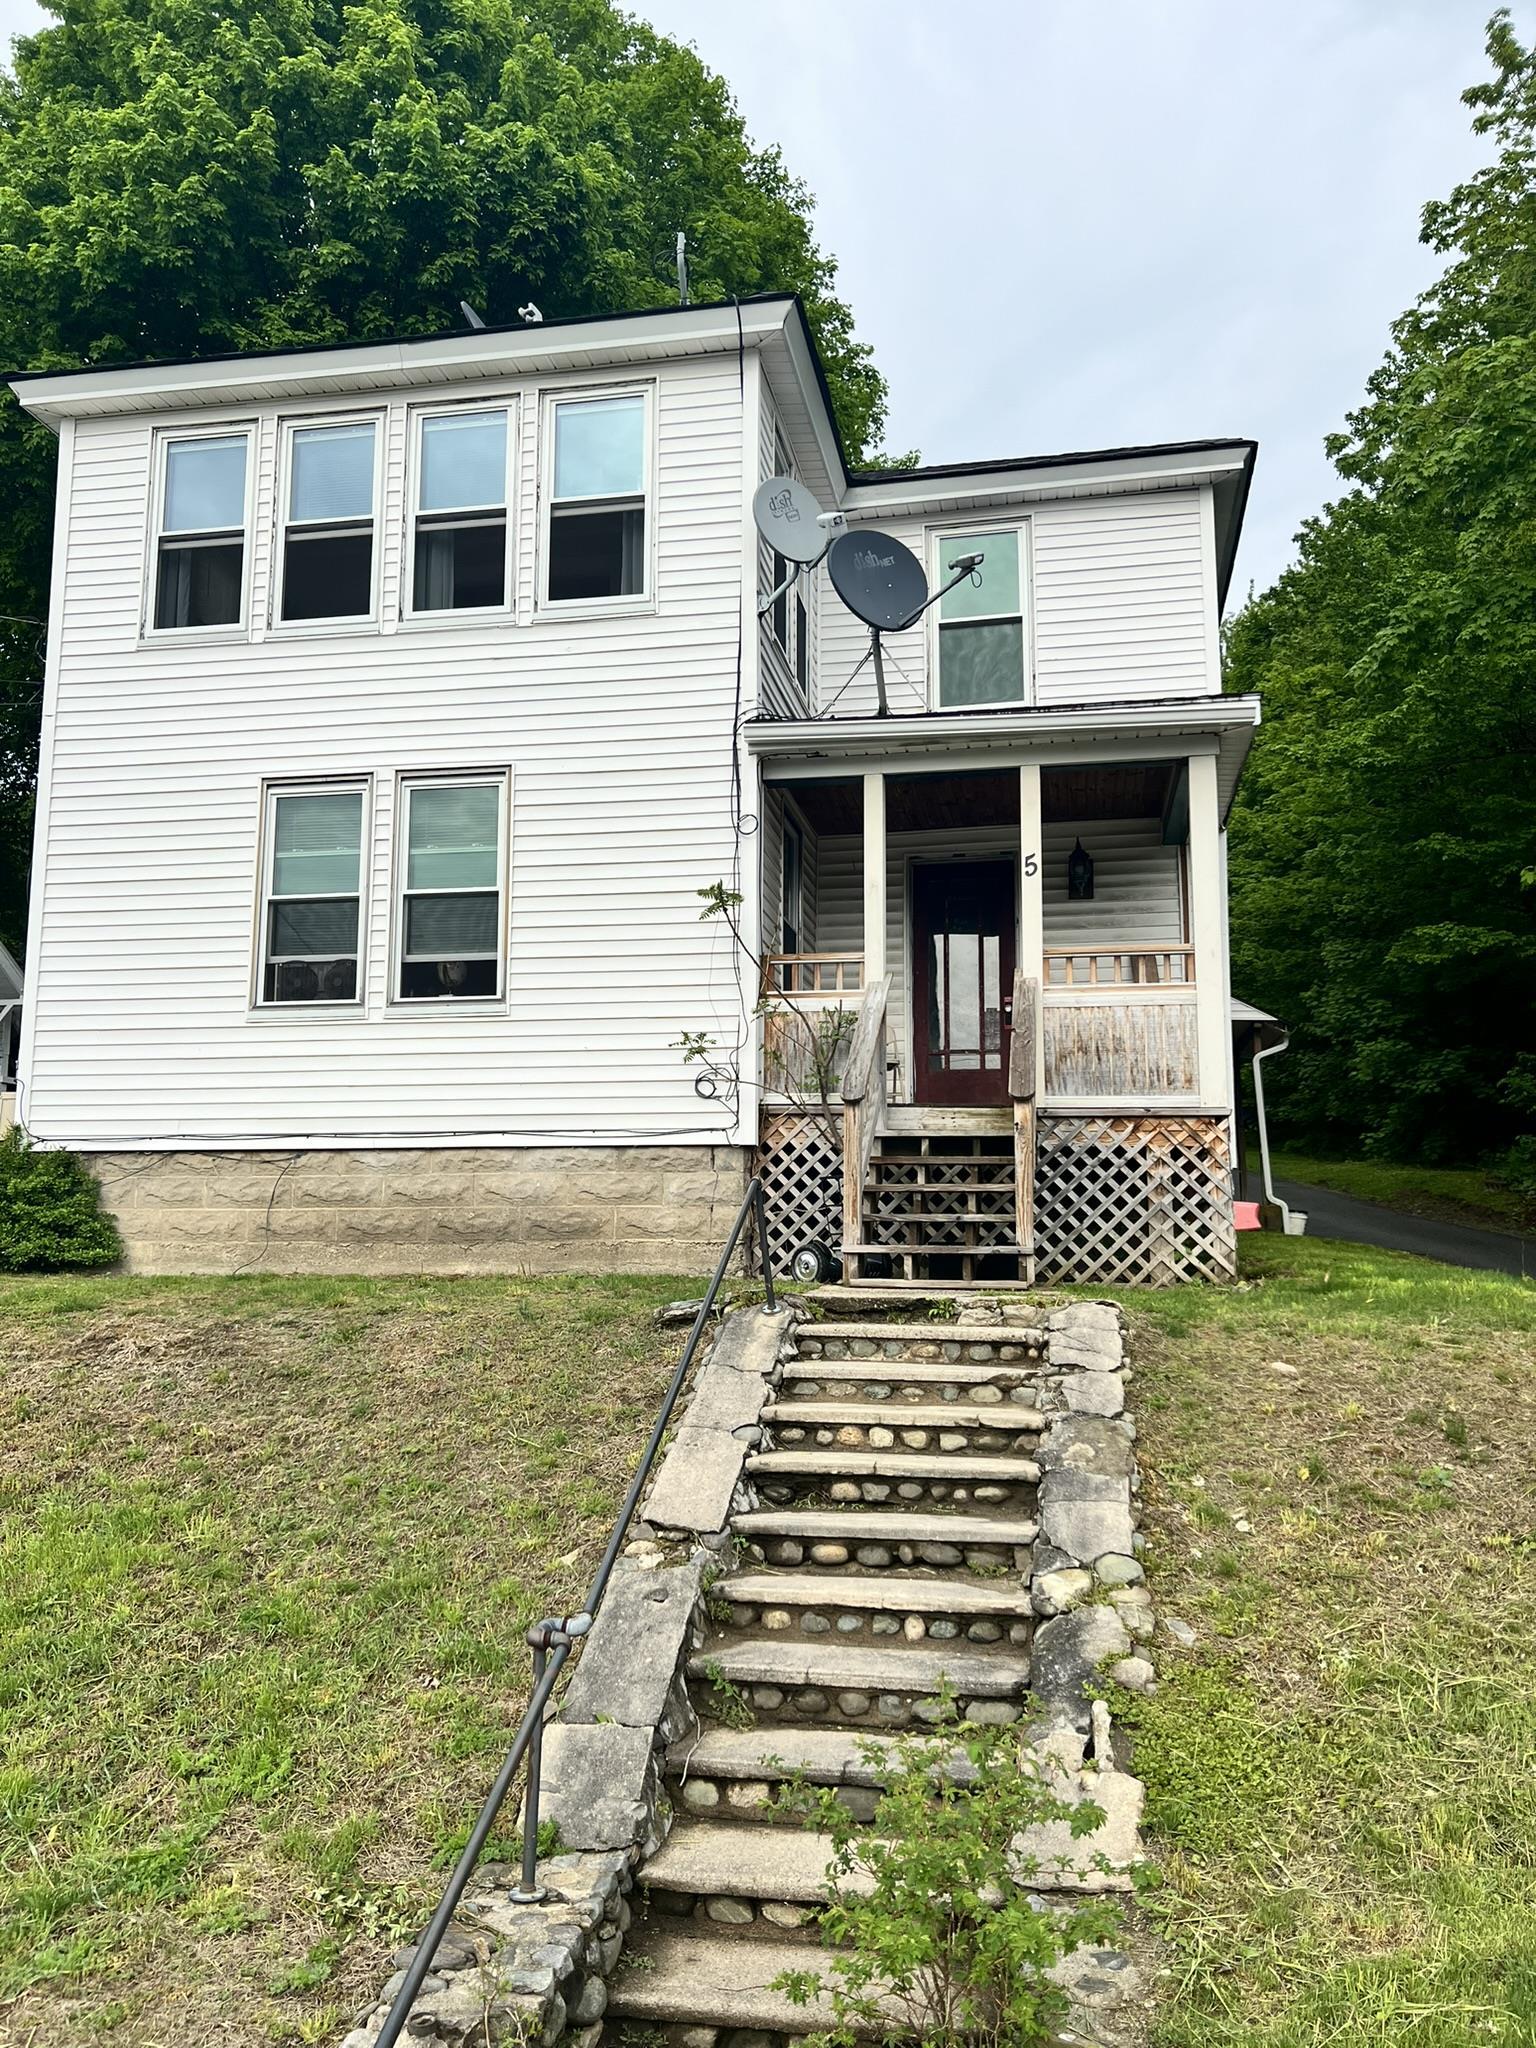 image of Claremont NH  3 Unit Multi Family | sq.ft. 4052 